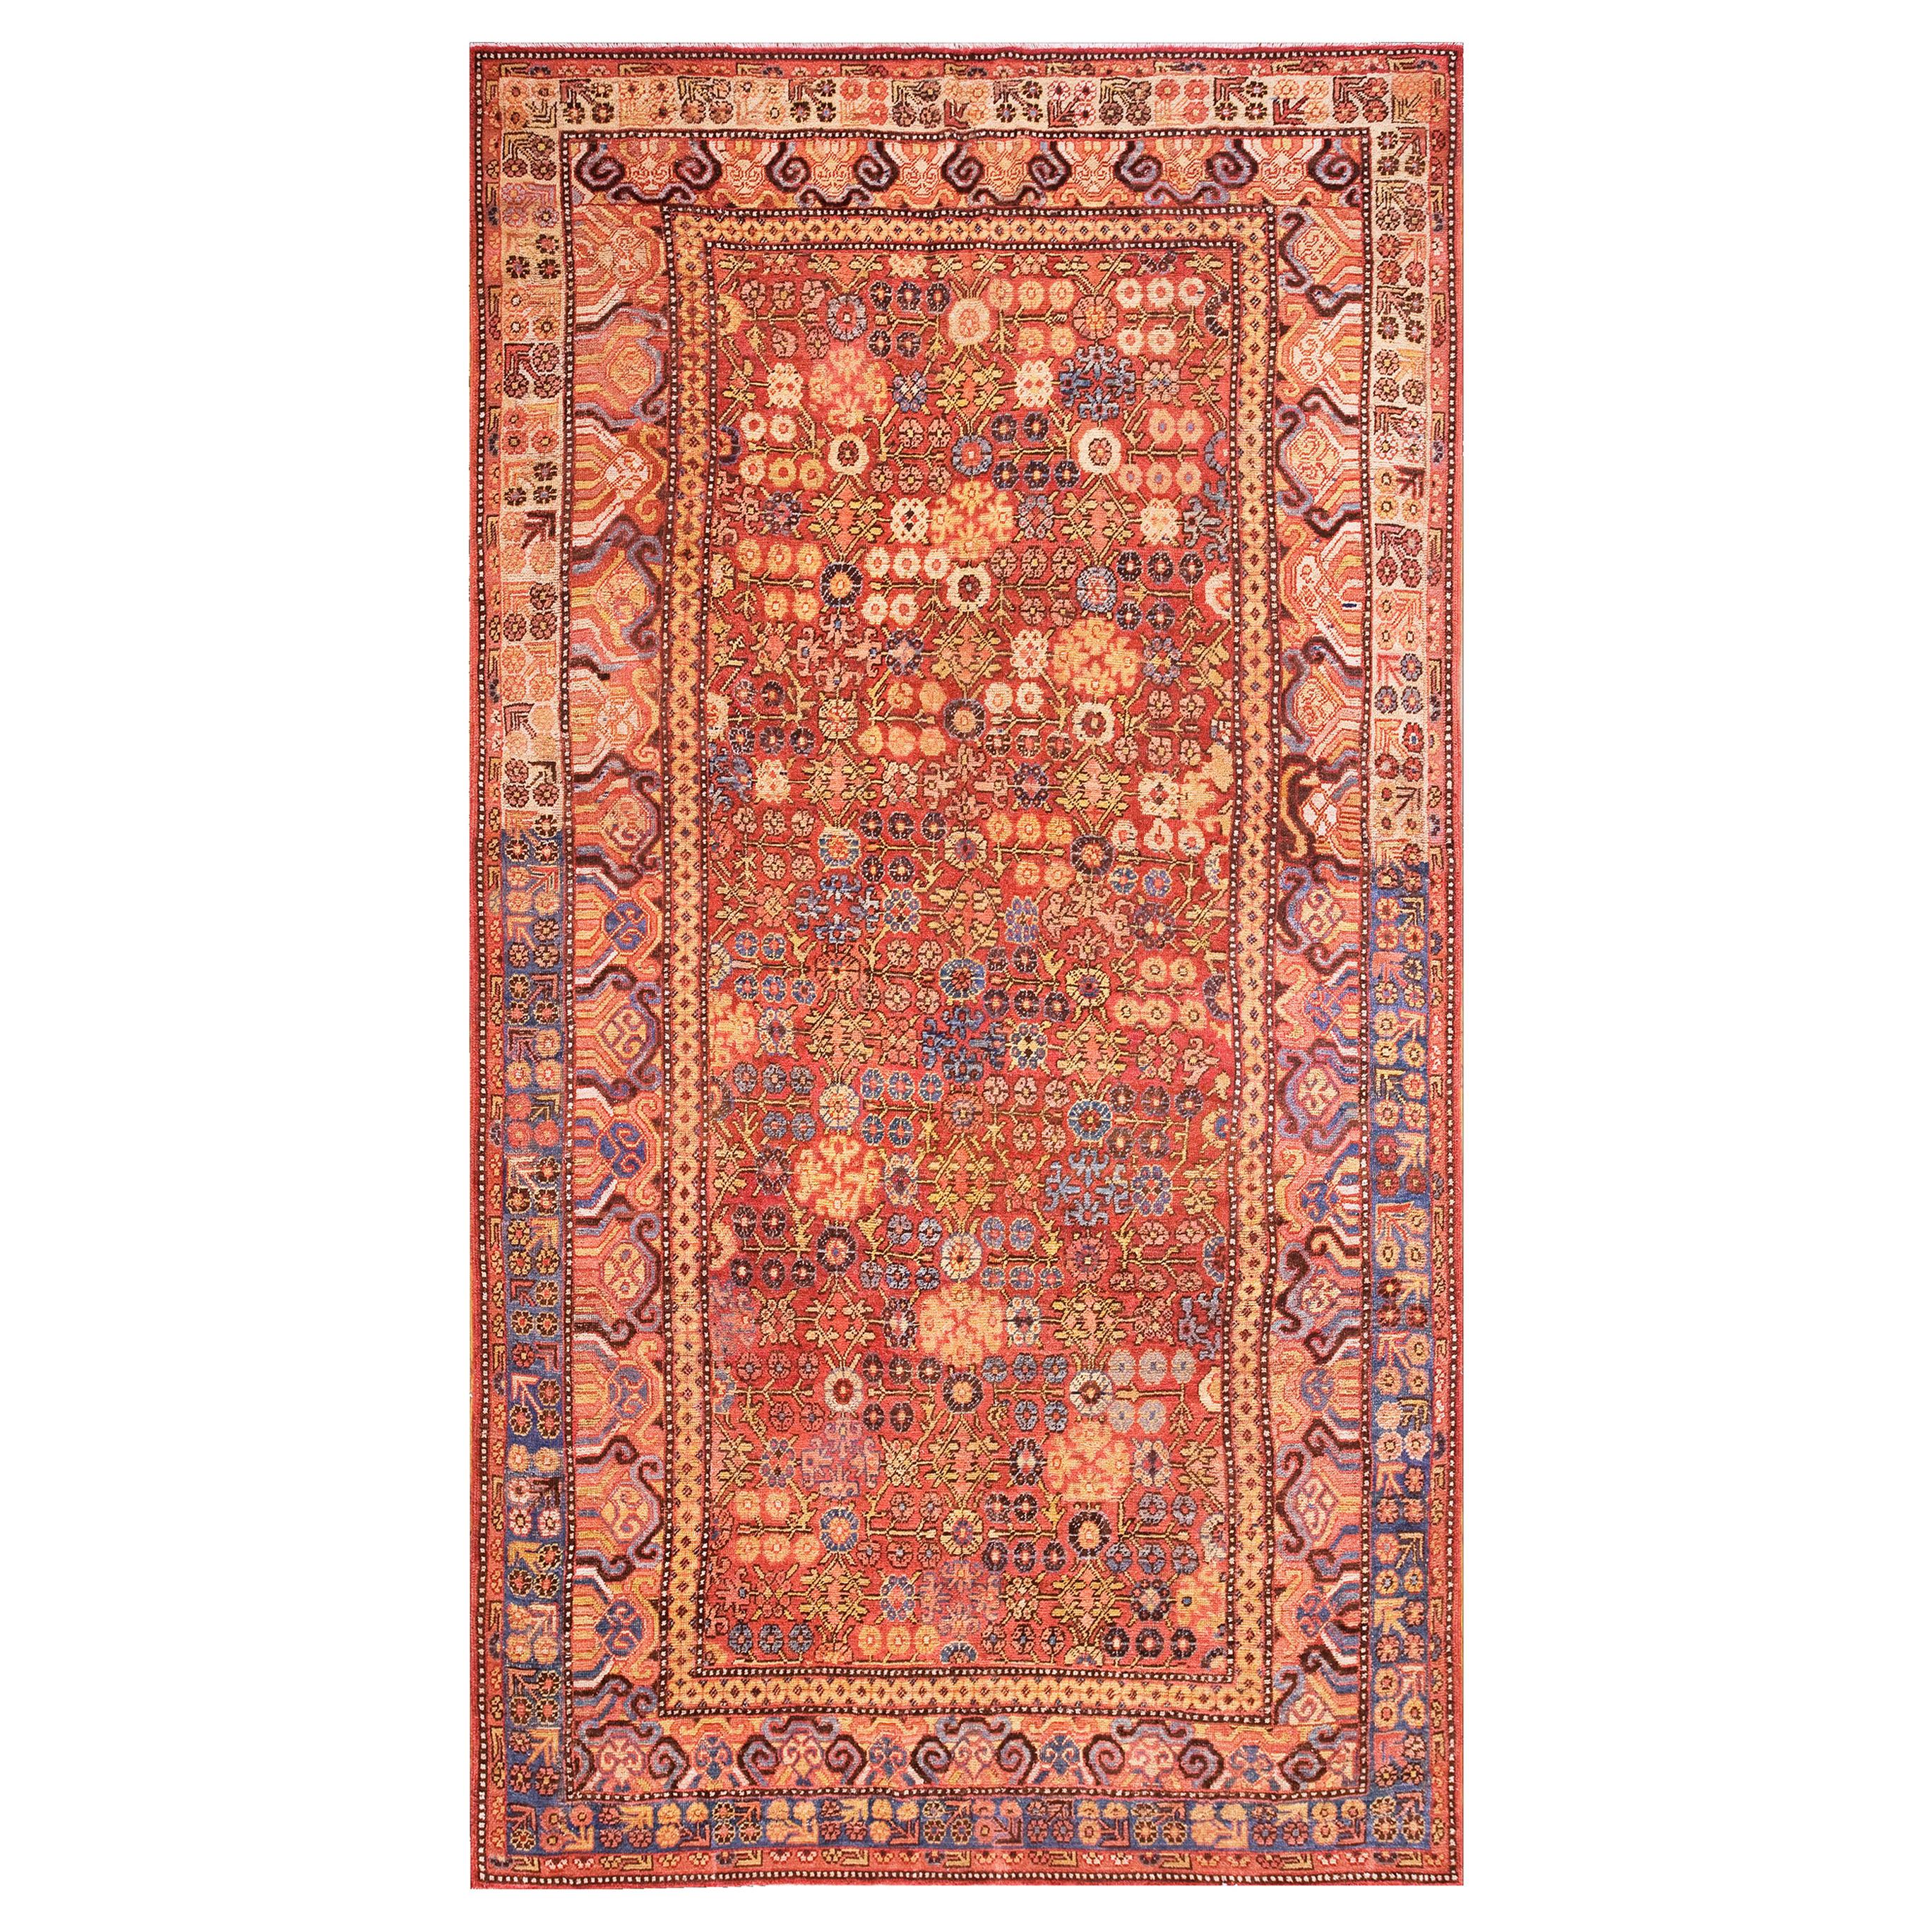 Late 18th Century Central Asian Chinese Khotan Carpet (6'6" x 11'6" - 198 x 355) For Sale